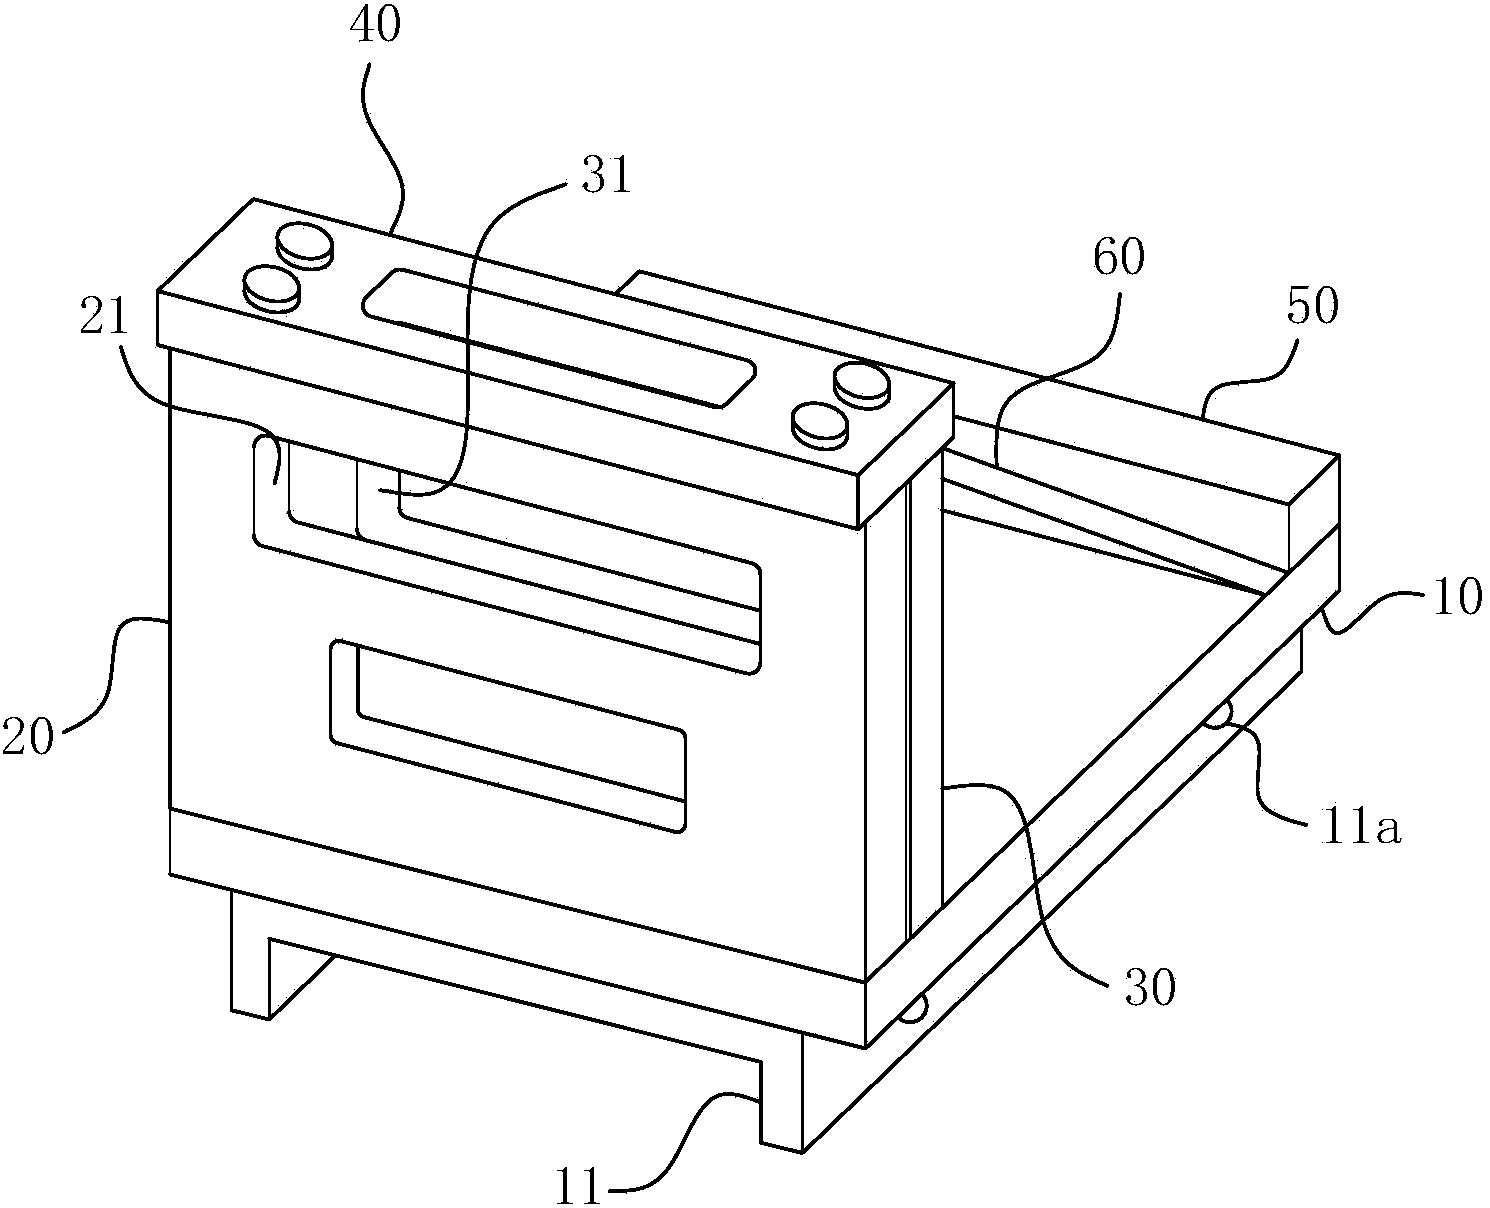 Three-point bending supporting device based on dynamic fracture toughness of test material